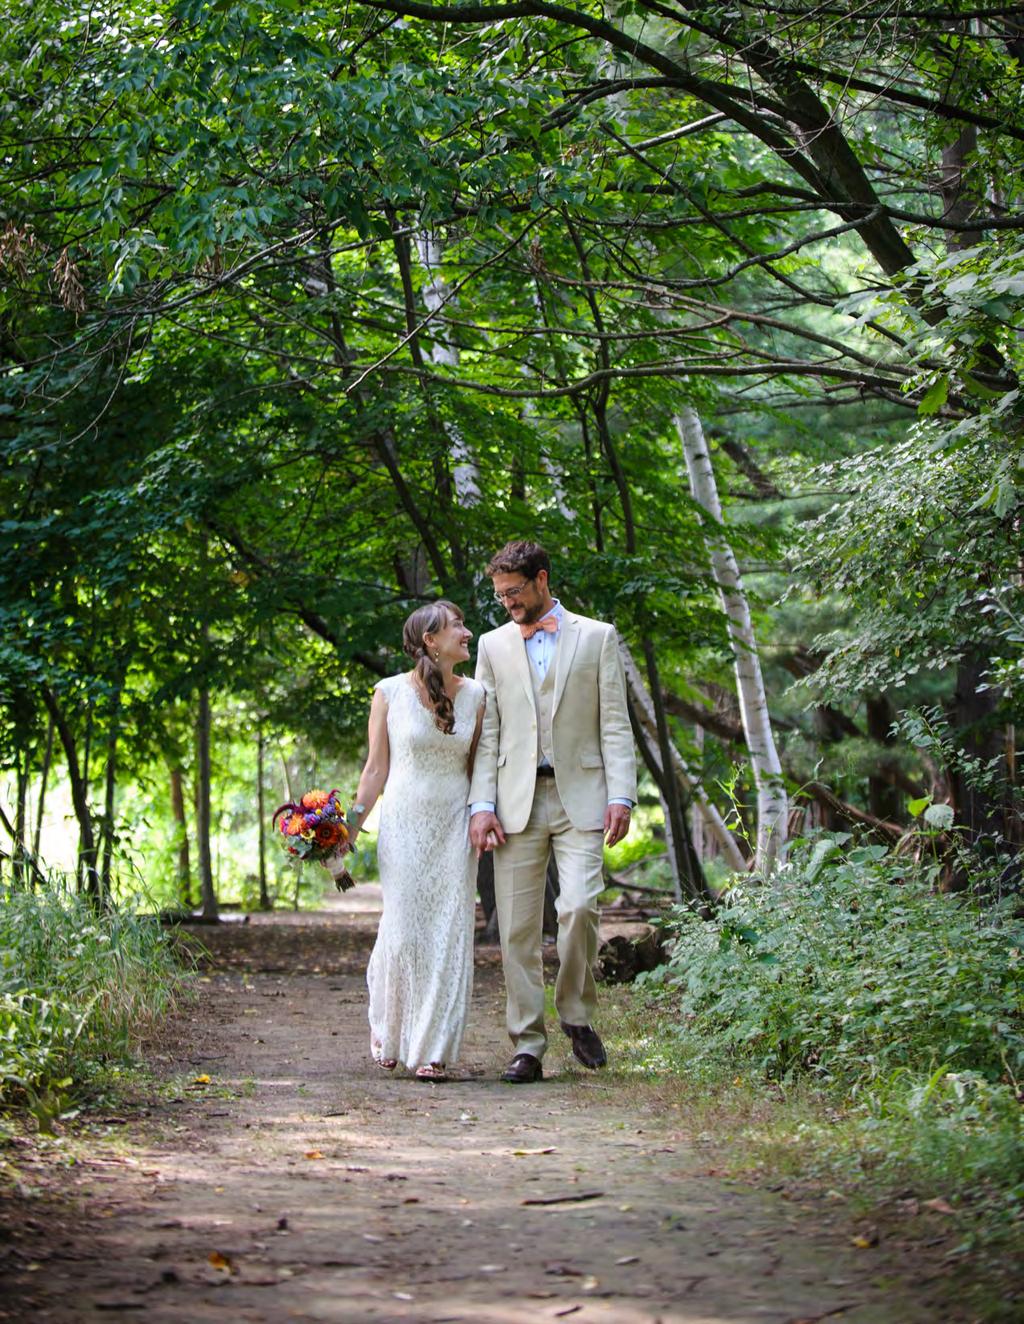 Weddings at Aldo Leopold Nature Center For availability and